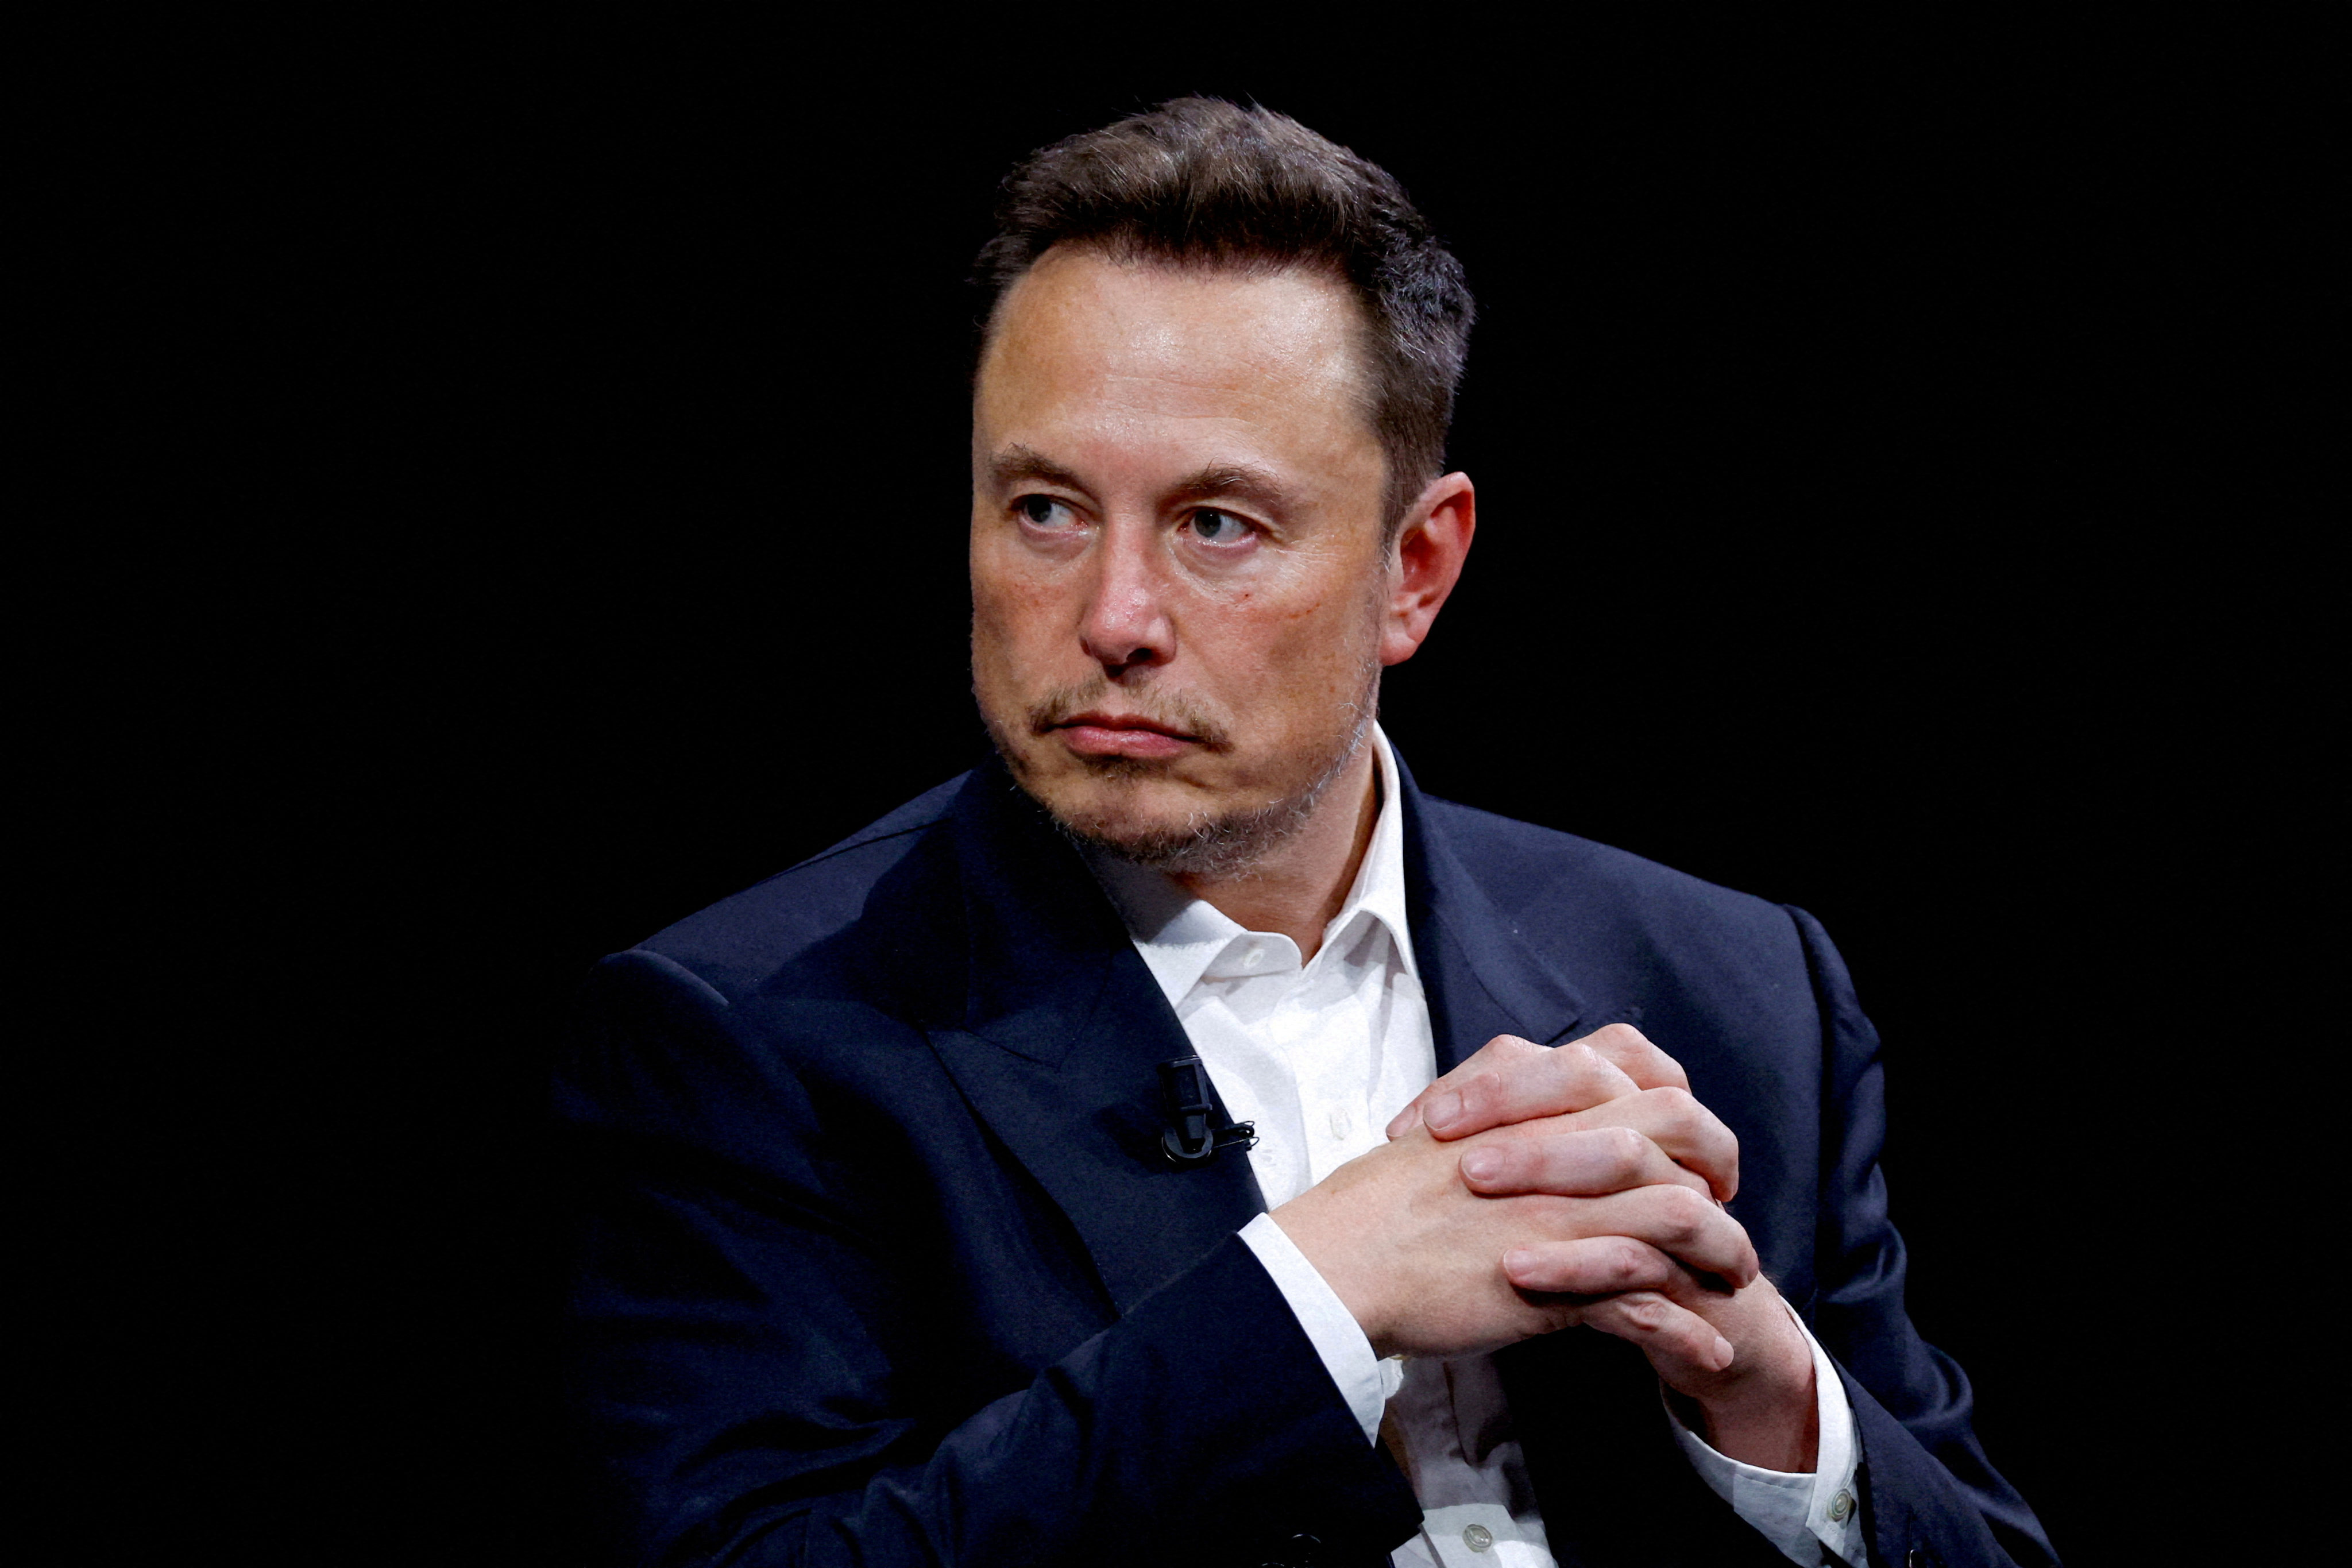 Elon Musk is called a malevolent narcissist, and Mark Zuckerberg ‘the most damaging man in tech’, by veteran Silicon Valley journalist Kara Swisher in her memoir Burn Book. Photo: Reuters